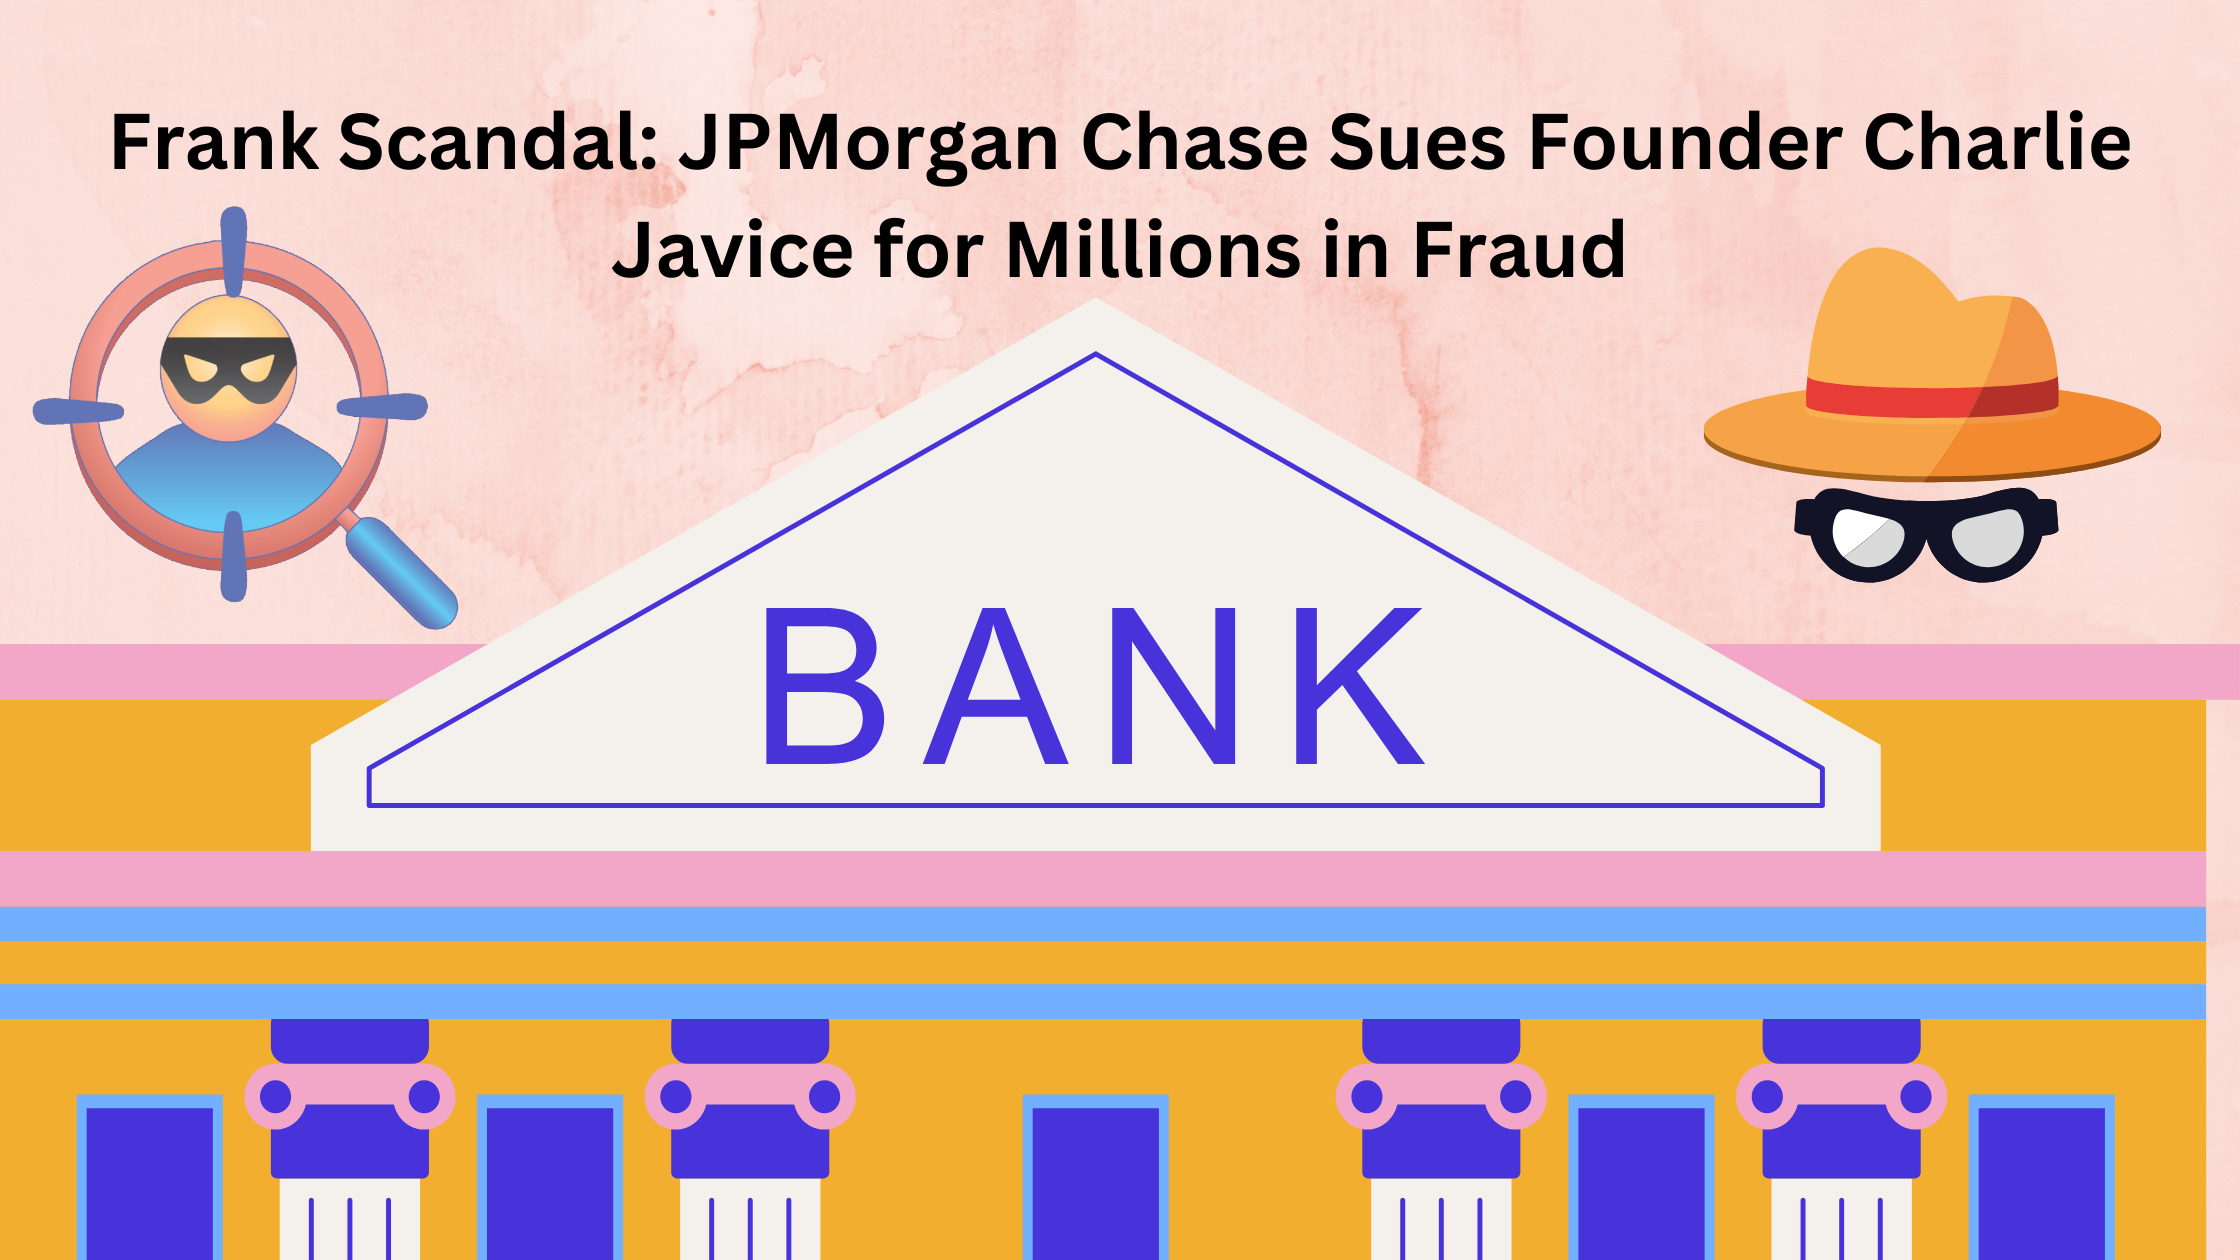 Frank Scandal JPMorgan Chase Sues Founder Charlie Javice for Millions in Fraud